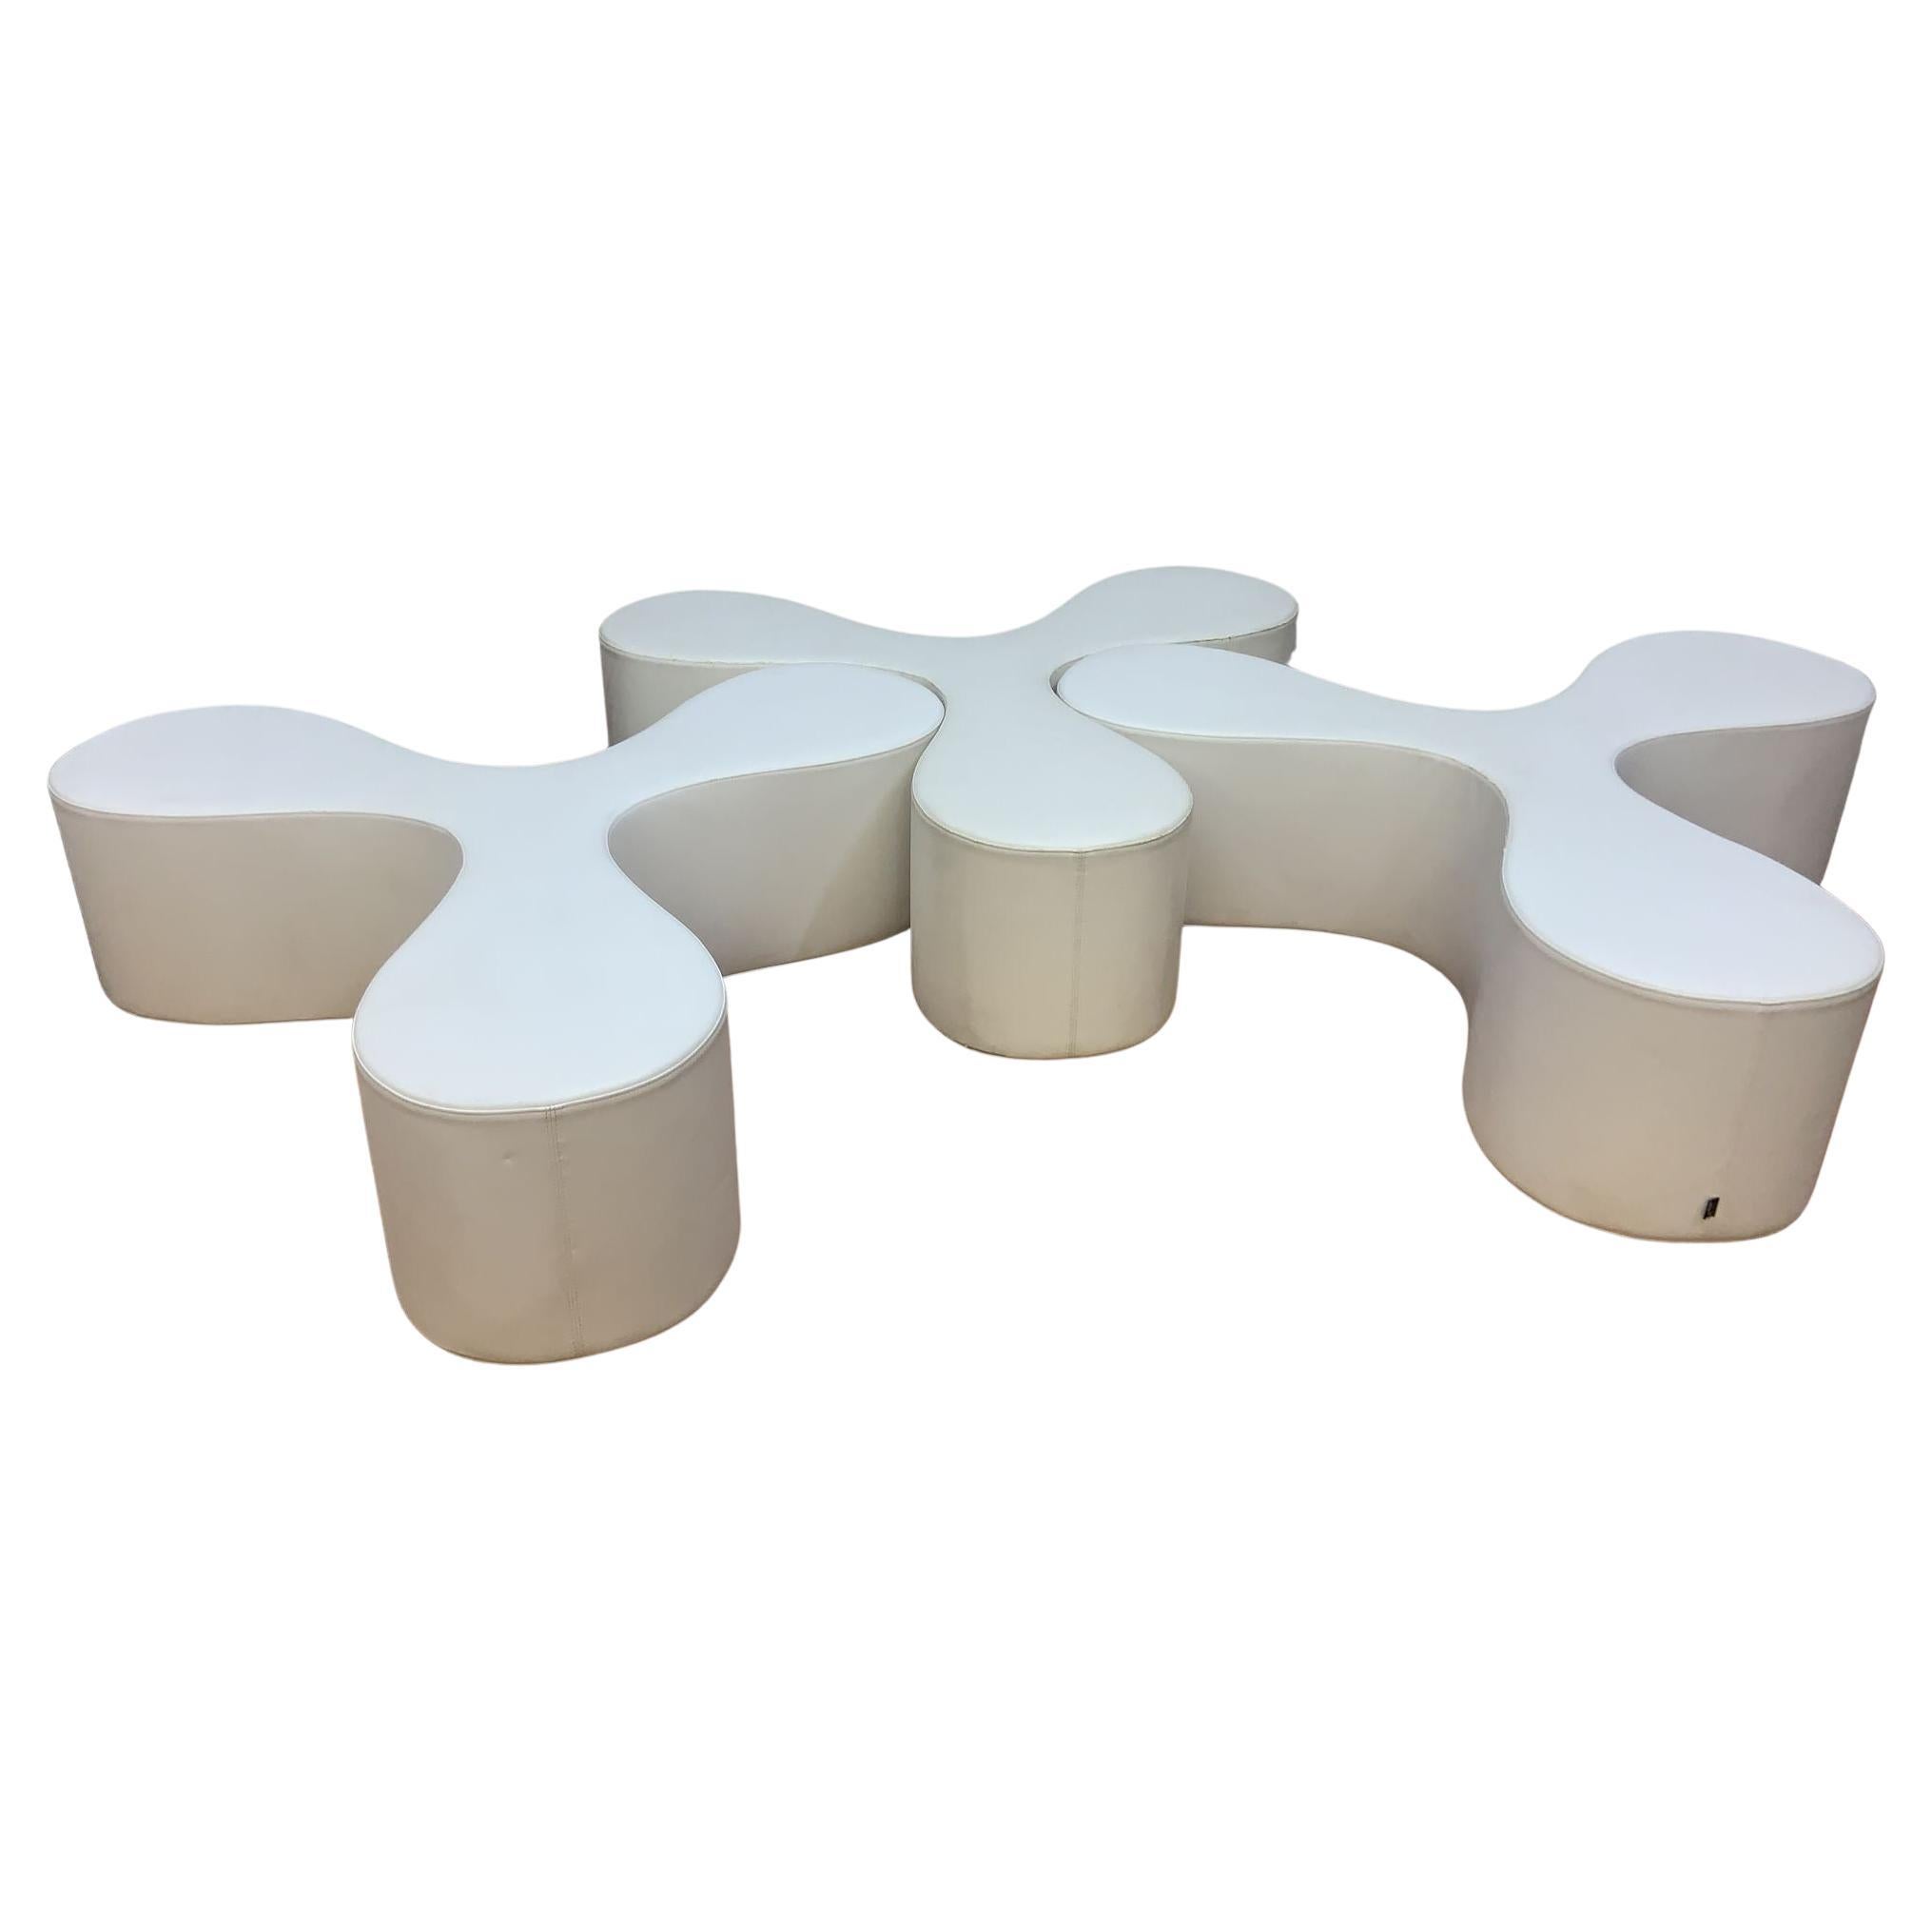 Sculptural Champaign White Leather Vitra Flower Bench By SANAA - Set of 3 For Sale